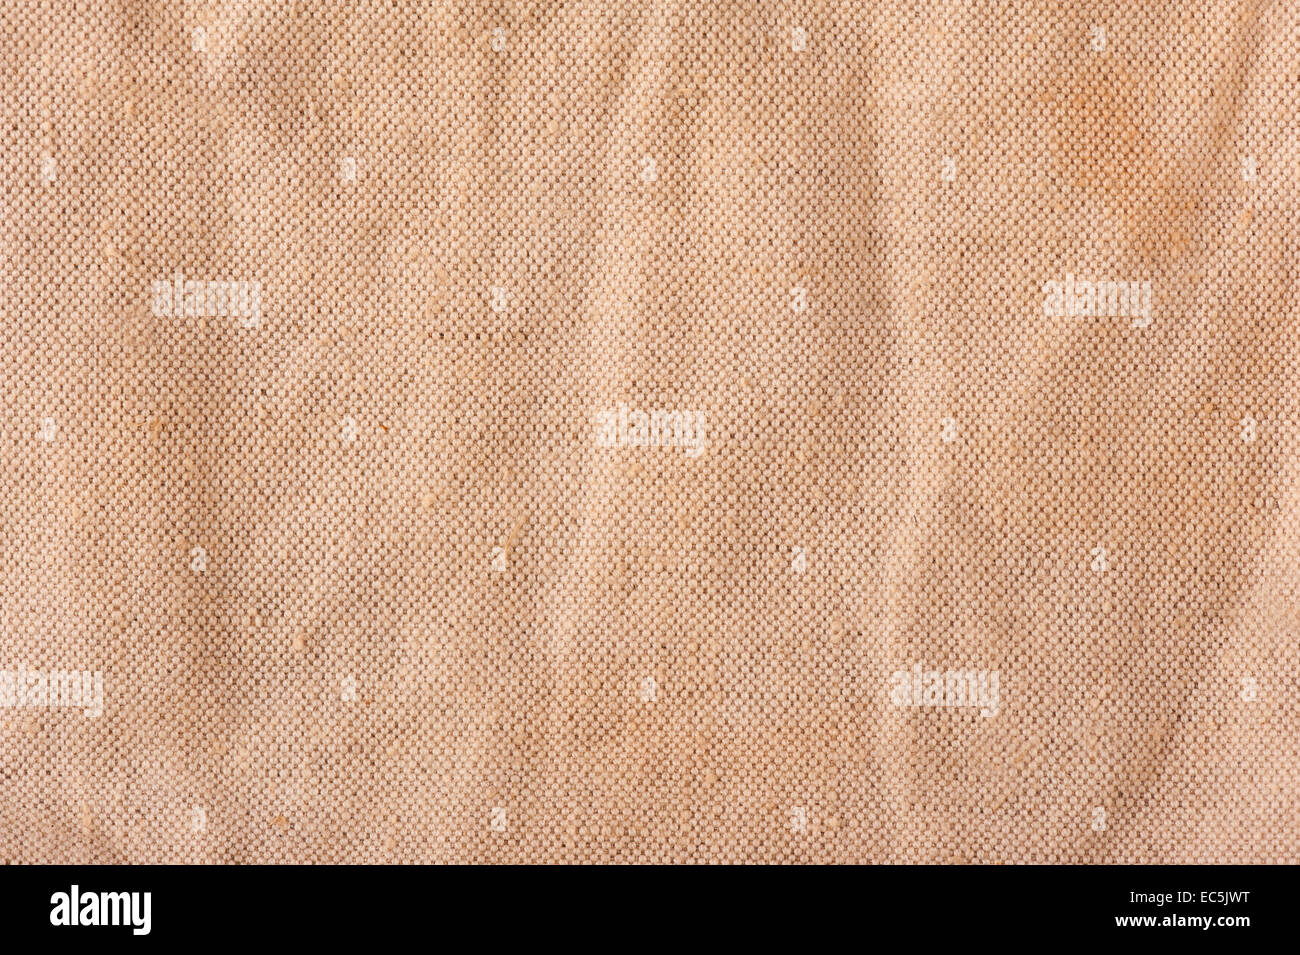 Genuine Cotton Linen Cloth Texture Stock Photo, Picture and Royalty Free  Image. Image 78905986.